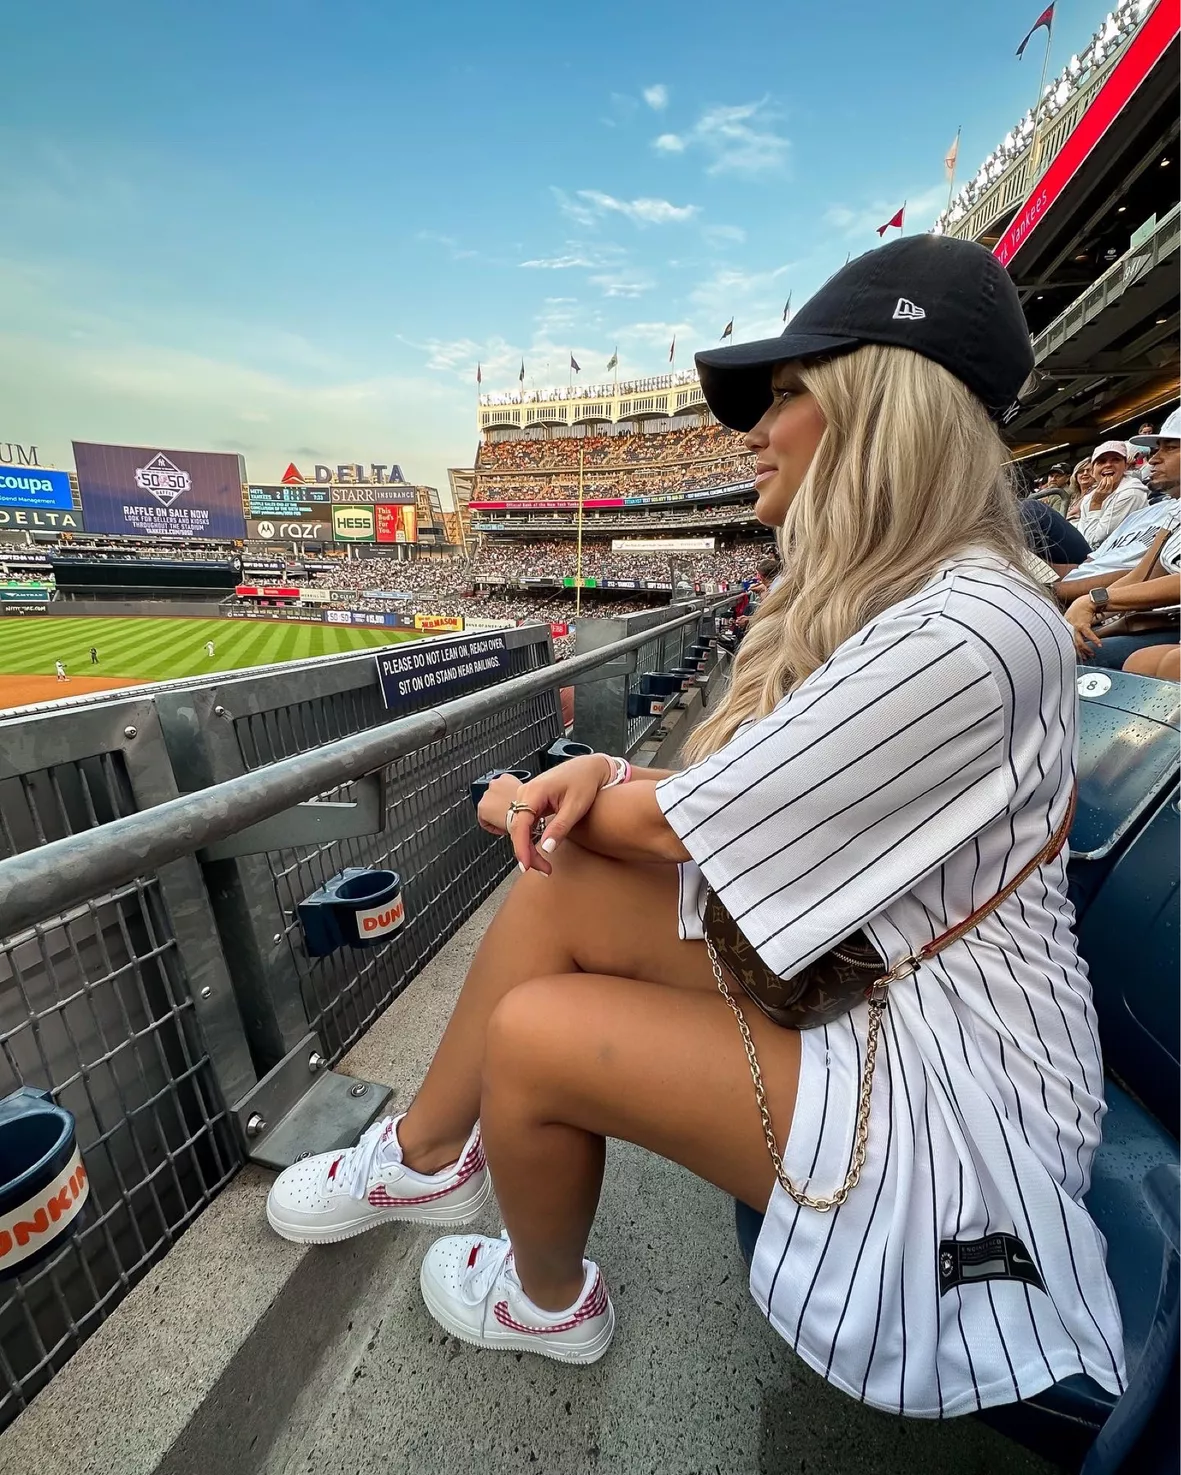 yankees game outfit